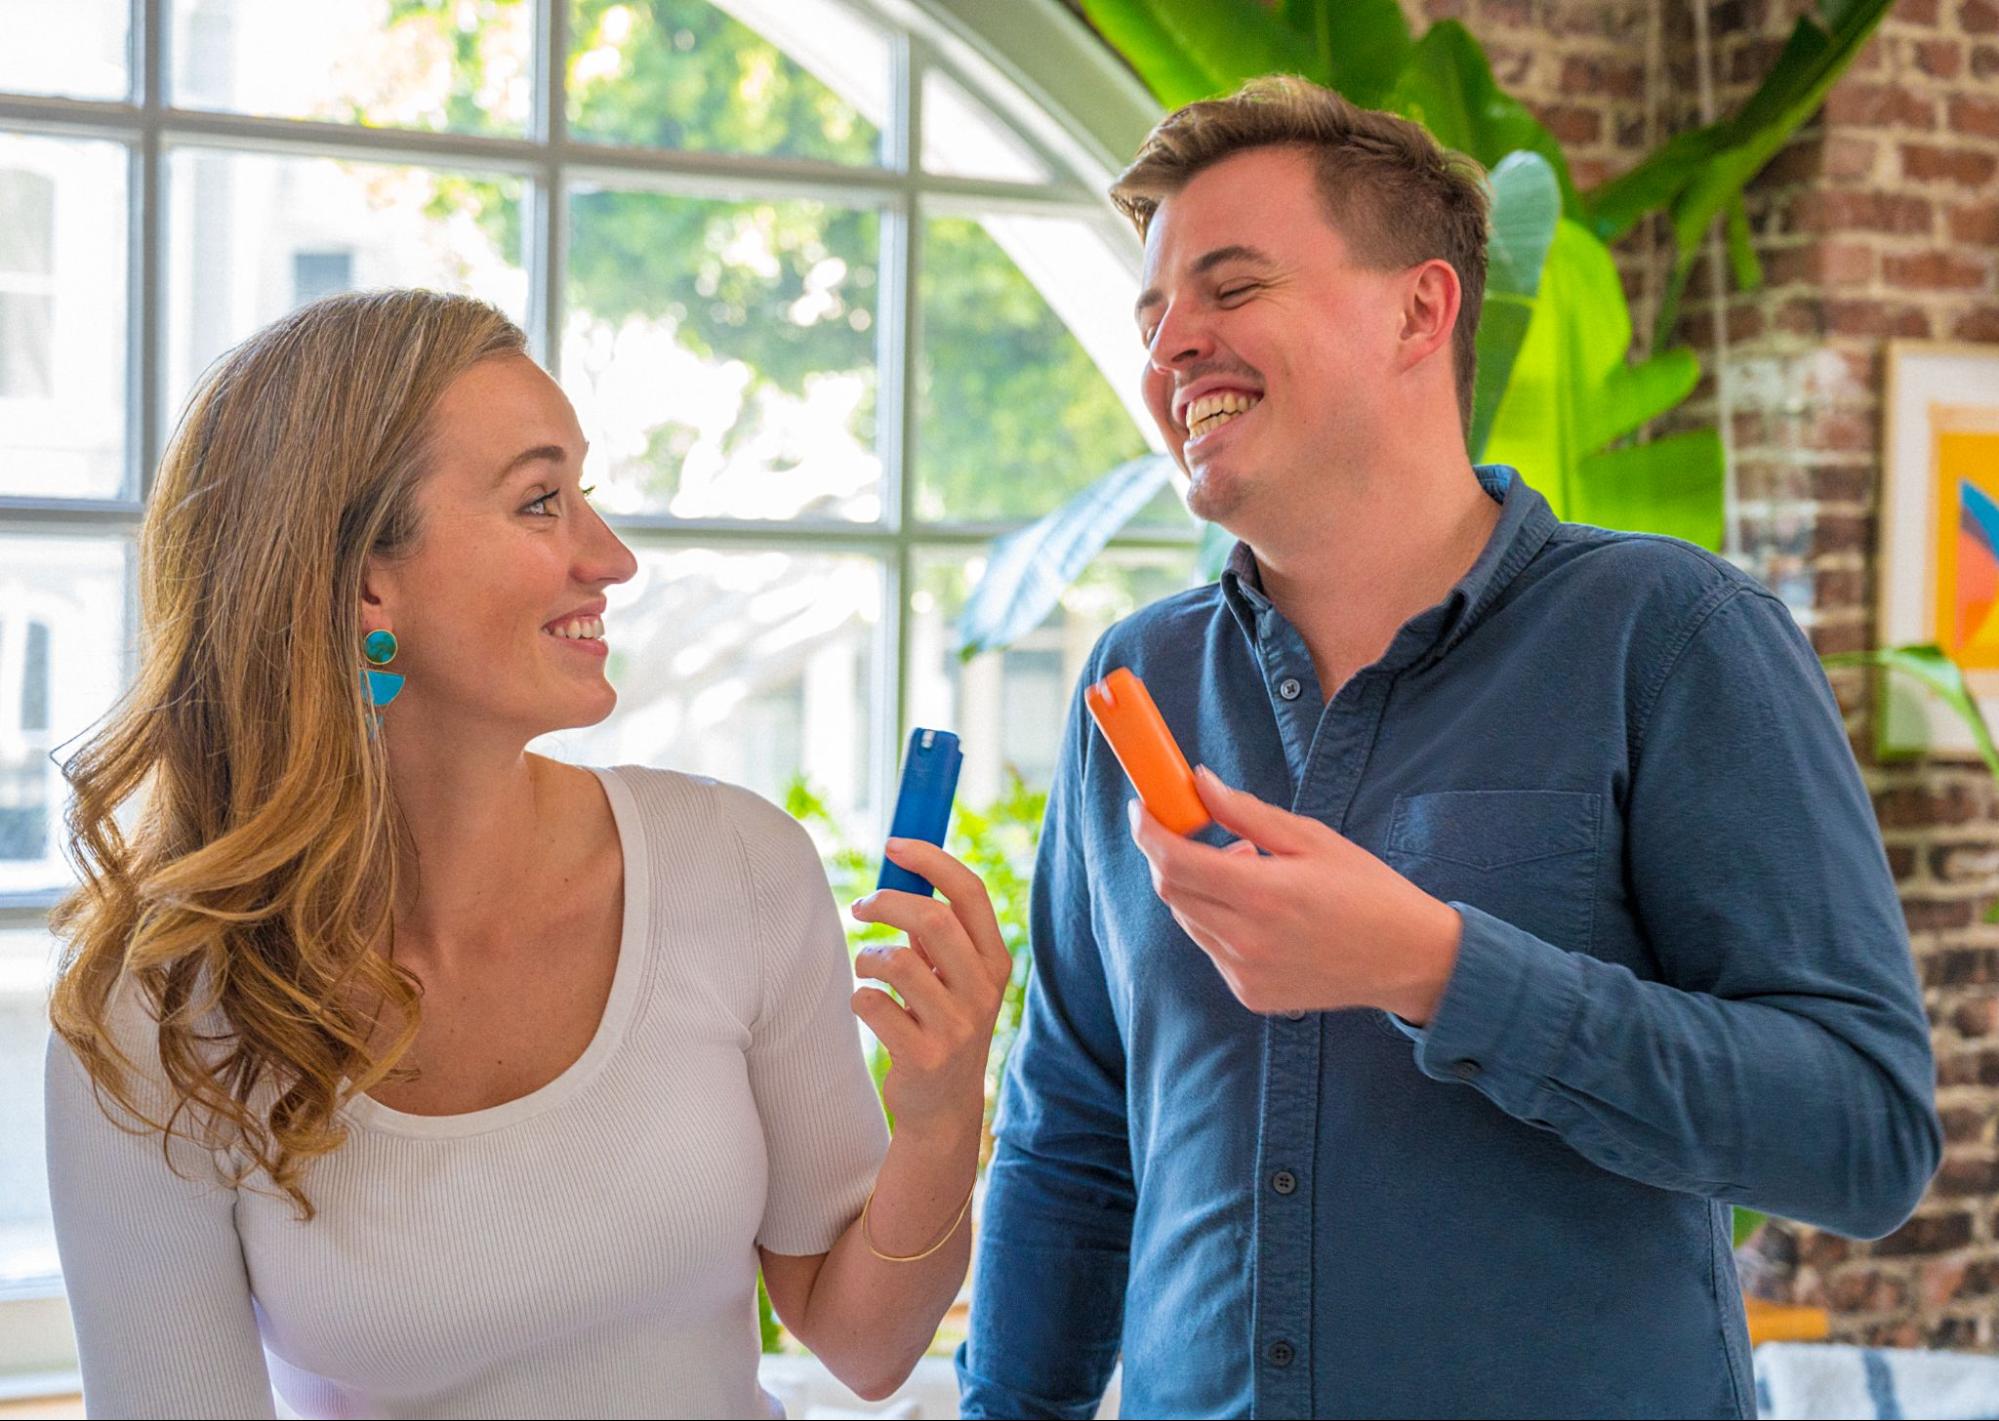 Cofounders of Sanikind, Martica Wakeman and Miles Pepper in an office setting holding up refillable Sanikind sanitizer capsules.